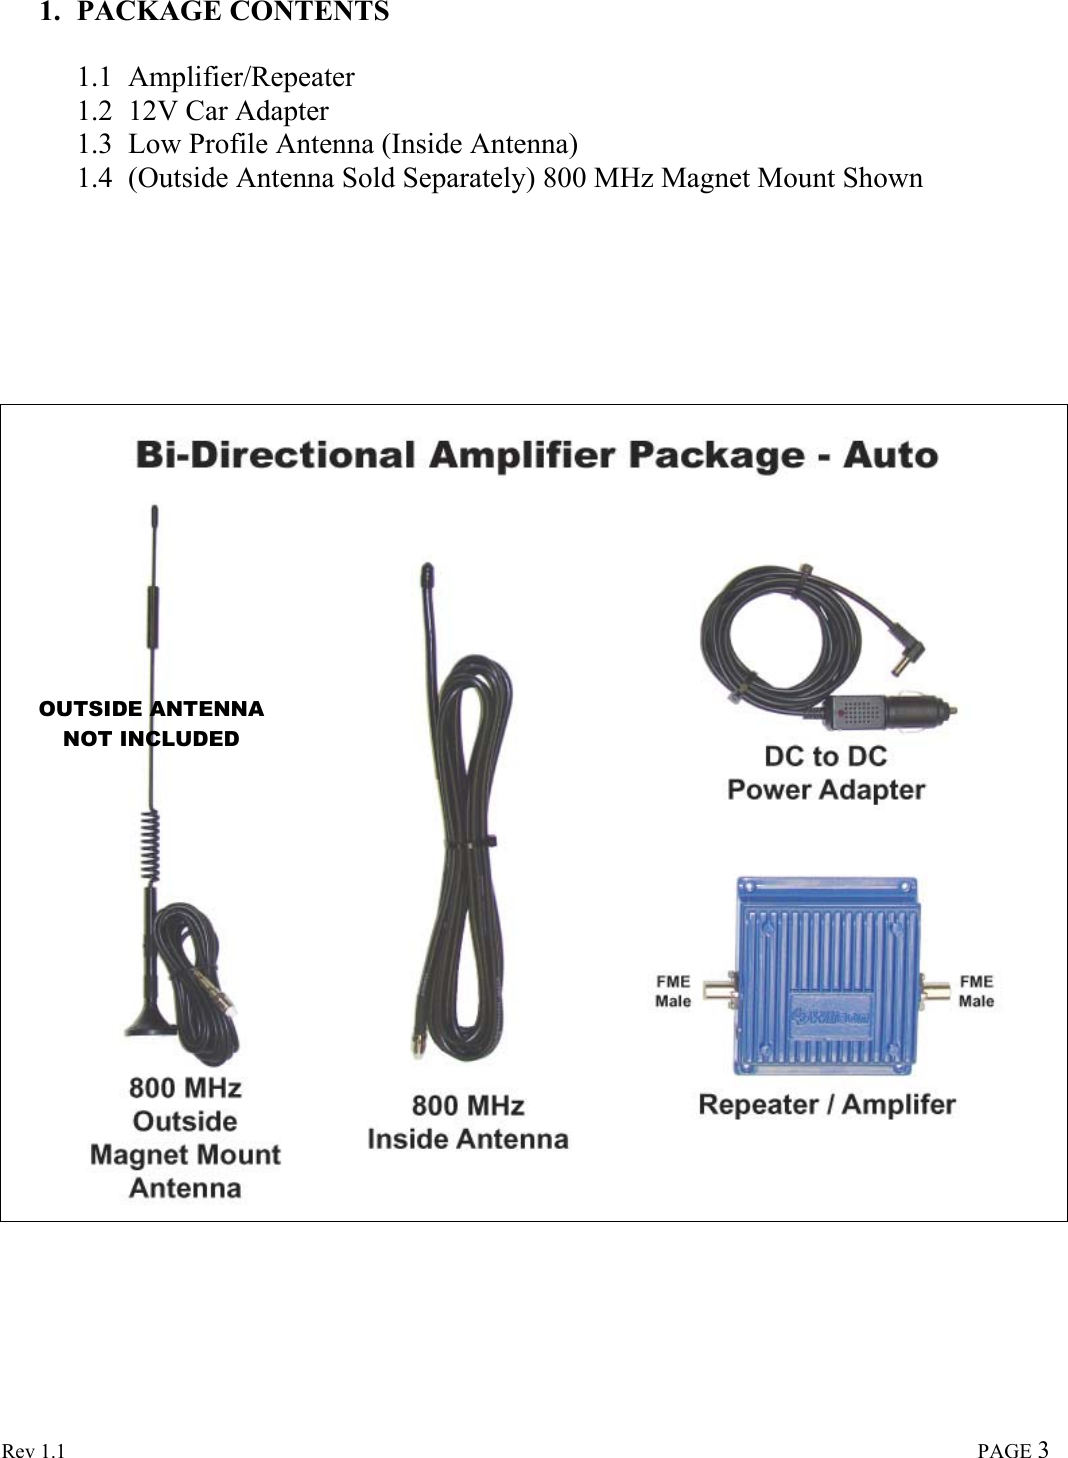  Rev 1.1                                                                                                                                                                               PAGE 3  1. PACKAGE CONTENTS  1.1 Amplifier/Repeater 1.2 12V Car Adapter 1.3 Low Profile Antenna (Inside Antenna) 1.4 (Outside Antenna Sold Separately) 800 MHz Magnet Mount Shown                                            OUTSIDE ANTENNA NOT INCLUDED 